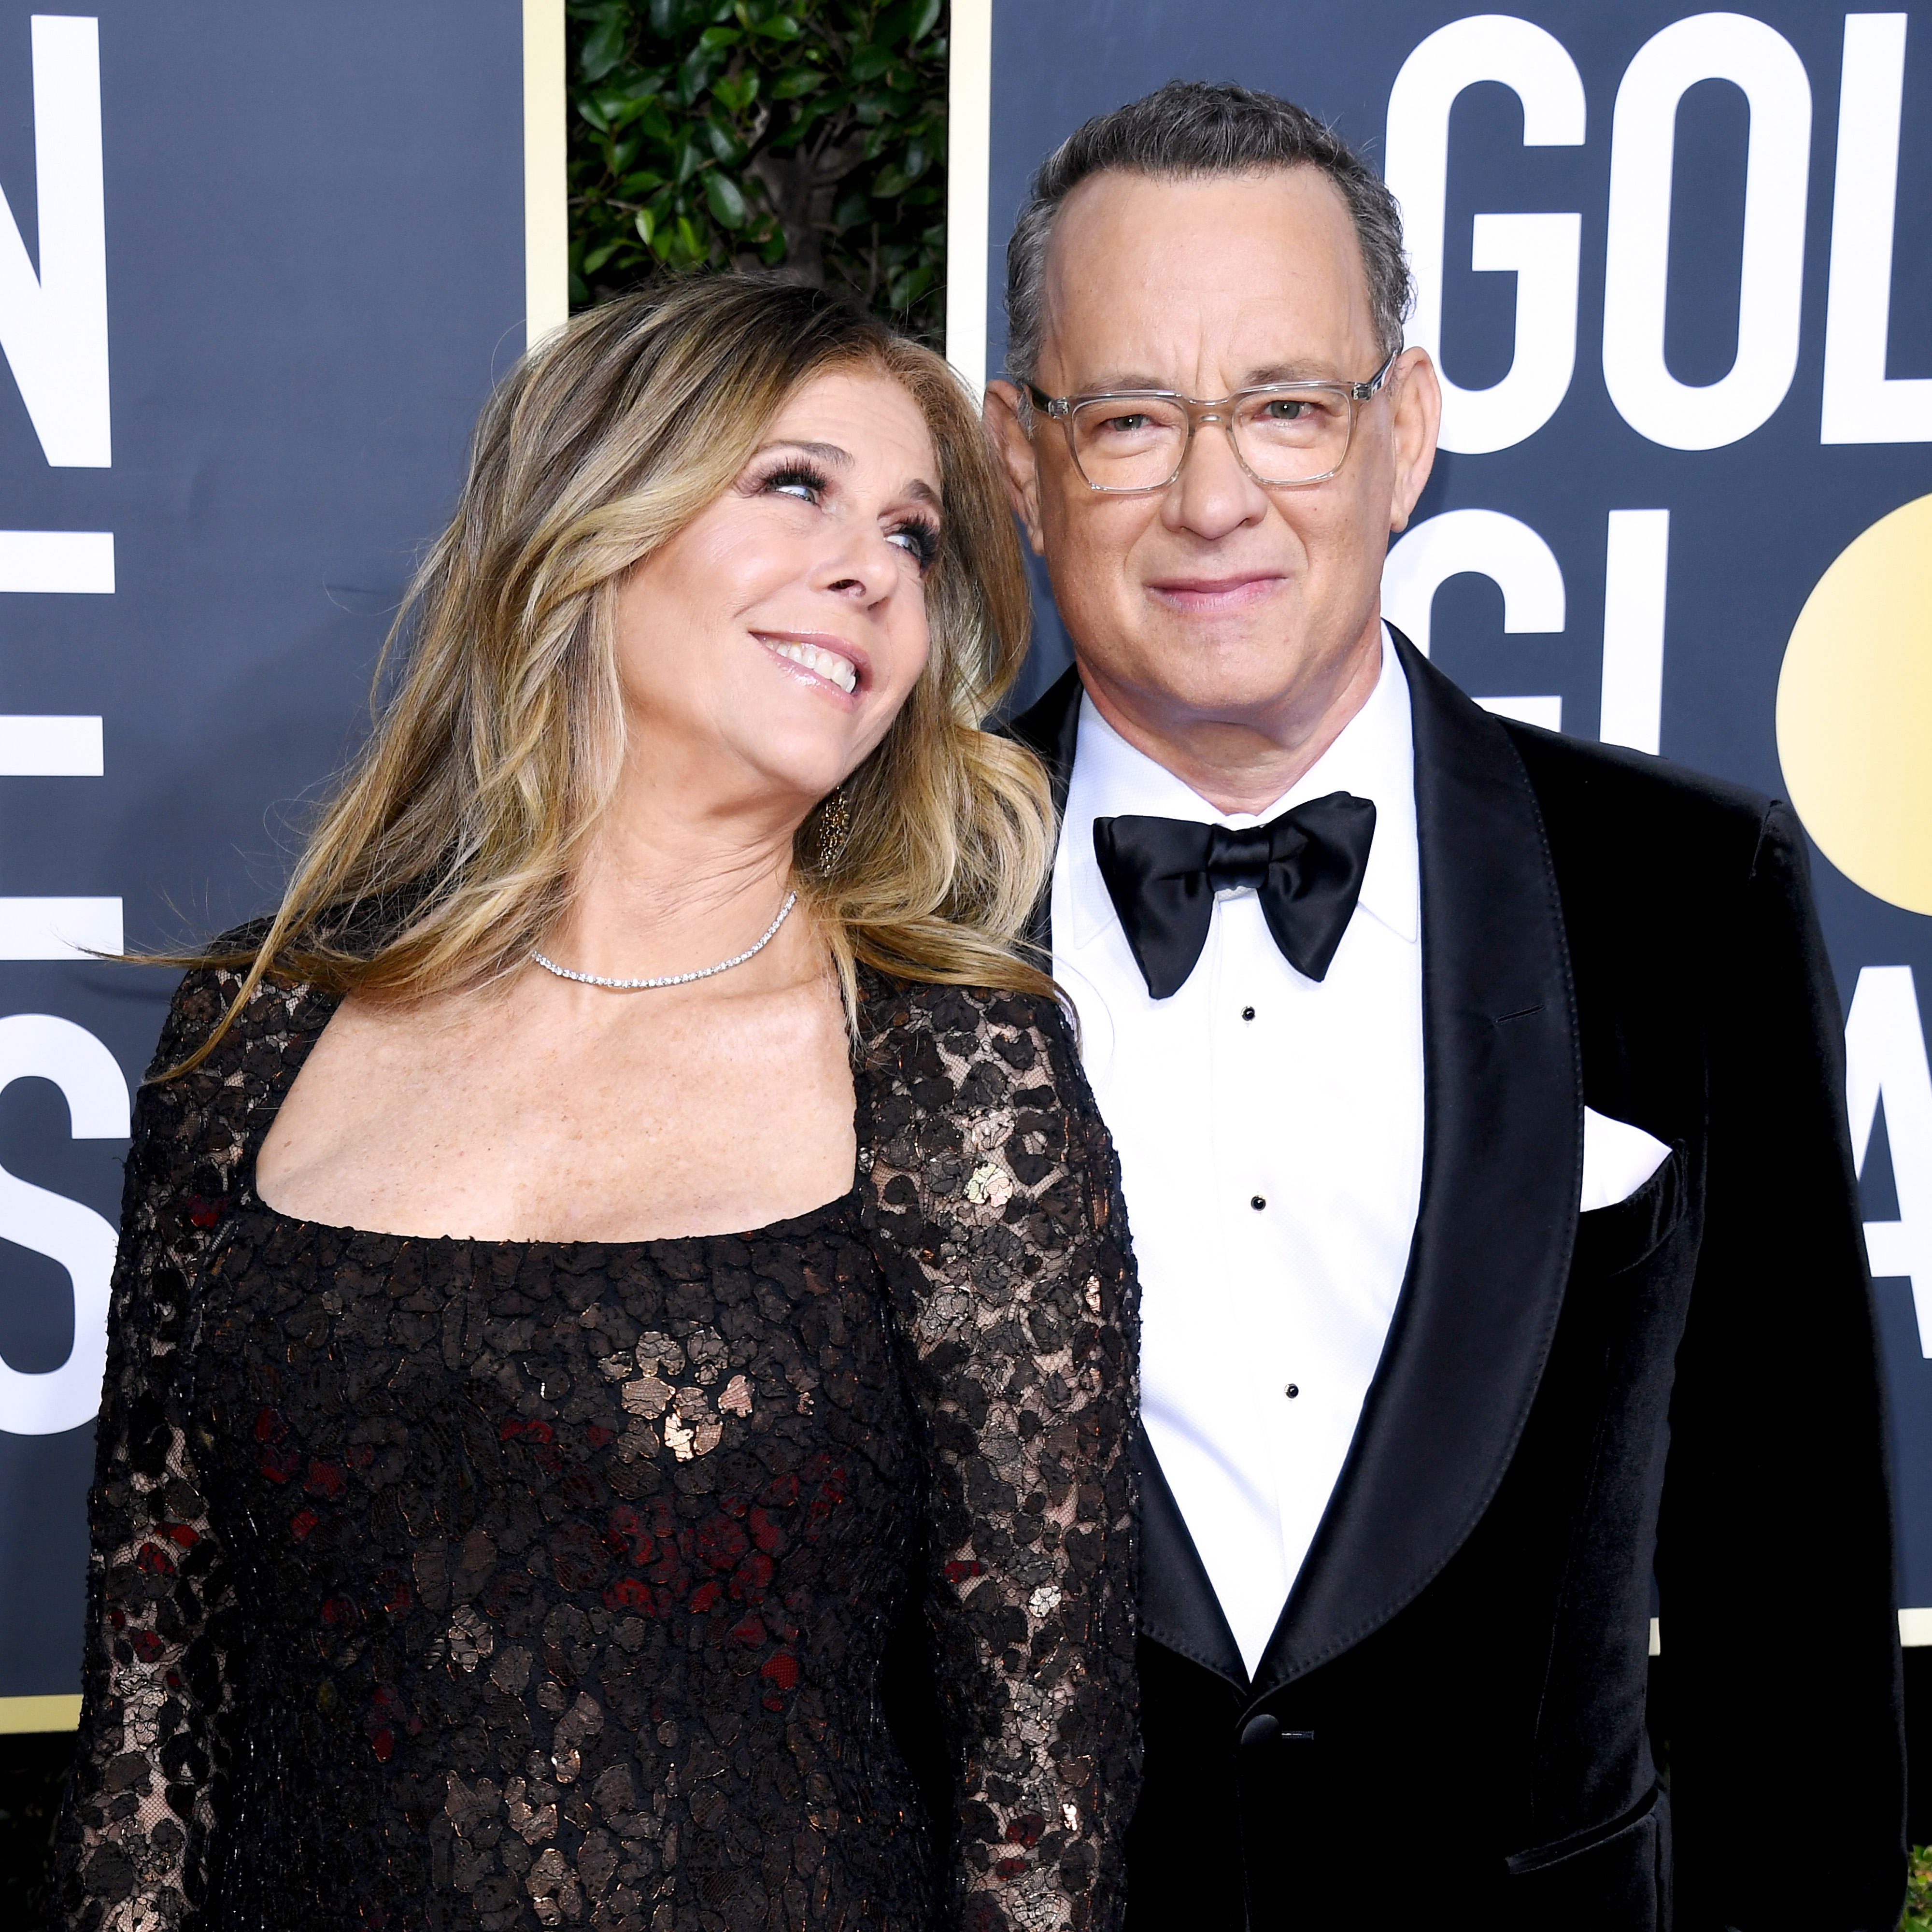 Rita Wilson and Tom Hanks at the 77th Annual Golden Globe Awards on January 5, 2020, in Beverly Hills, California | Source: Getty Images